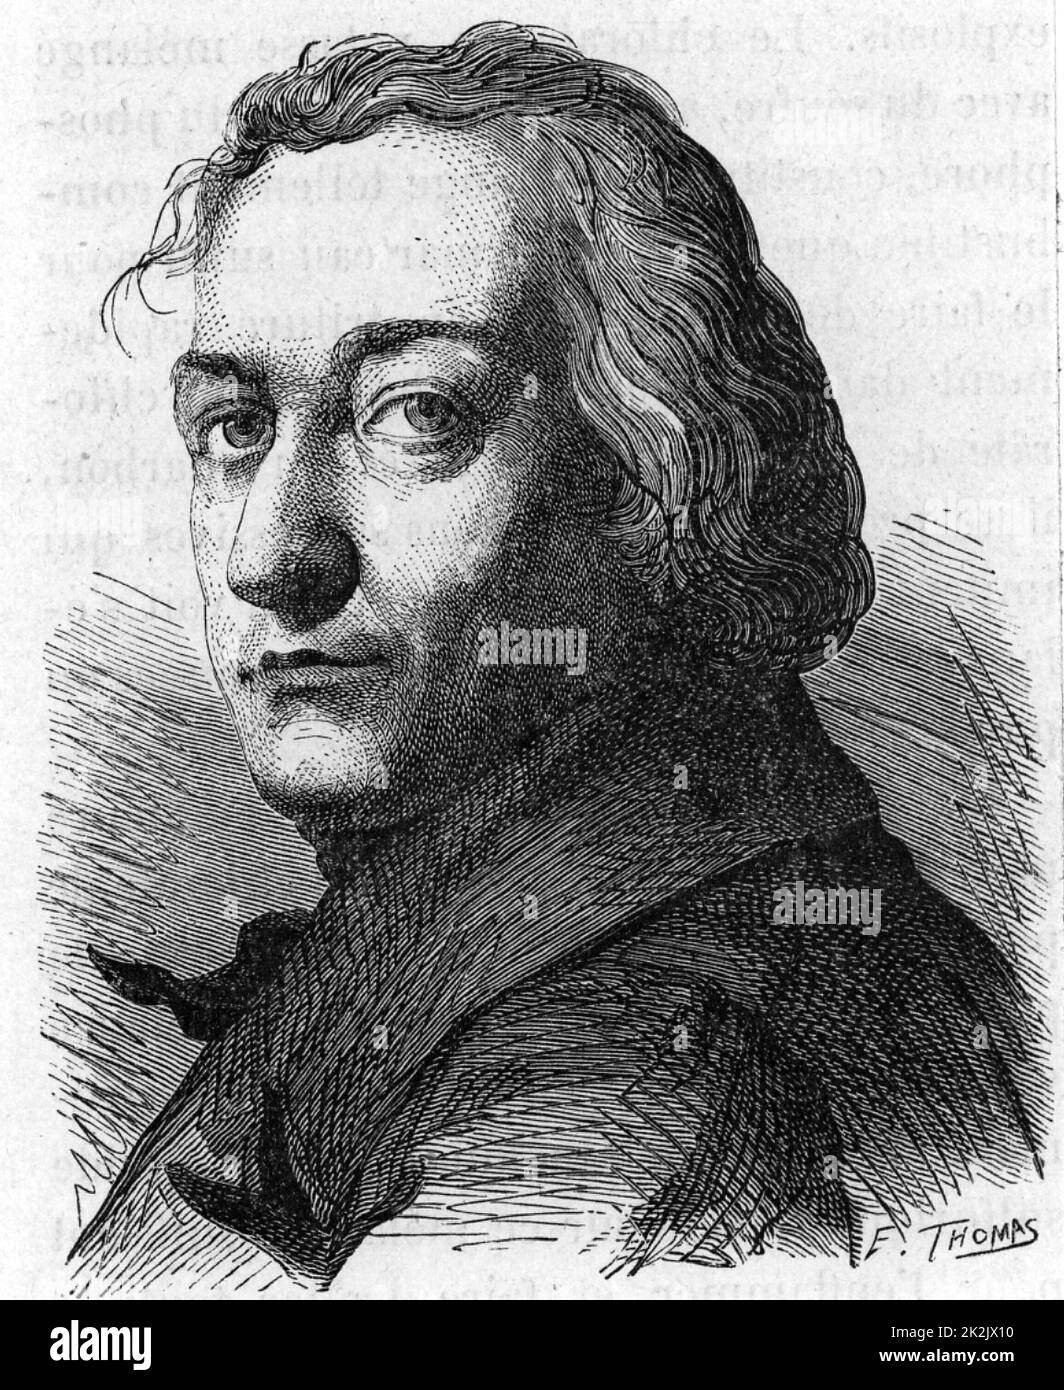 Claude Louis, Comte Berthollet (1748-1822) French chemist who assisted Lavoisier. Worked on dyes and chlorine for bleaching for the textile industry. Engraving from 'Les Merveilles de l'Industrie' by Louis Figuier (Paris, c1870). Stock Photo